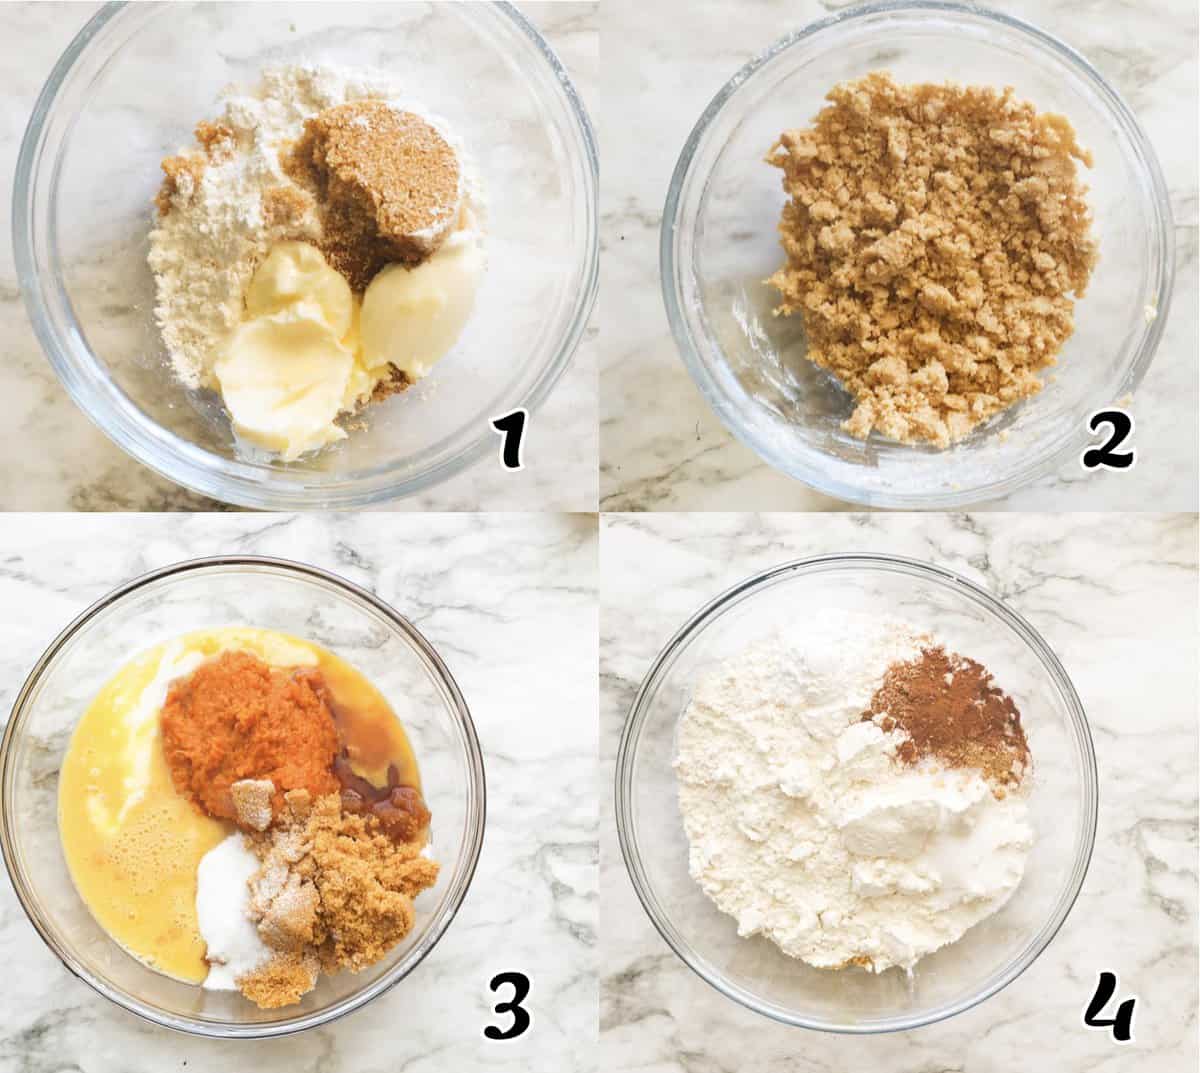 Make streusel and mix wet and dry ingredients separately